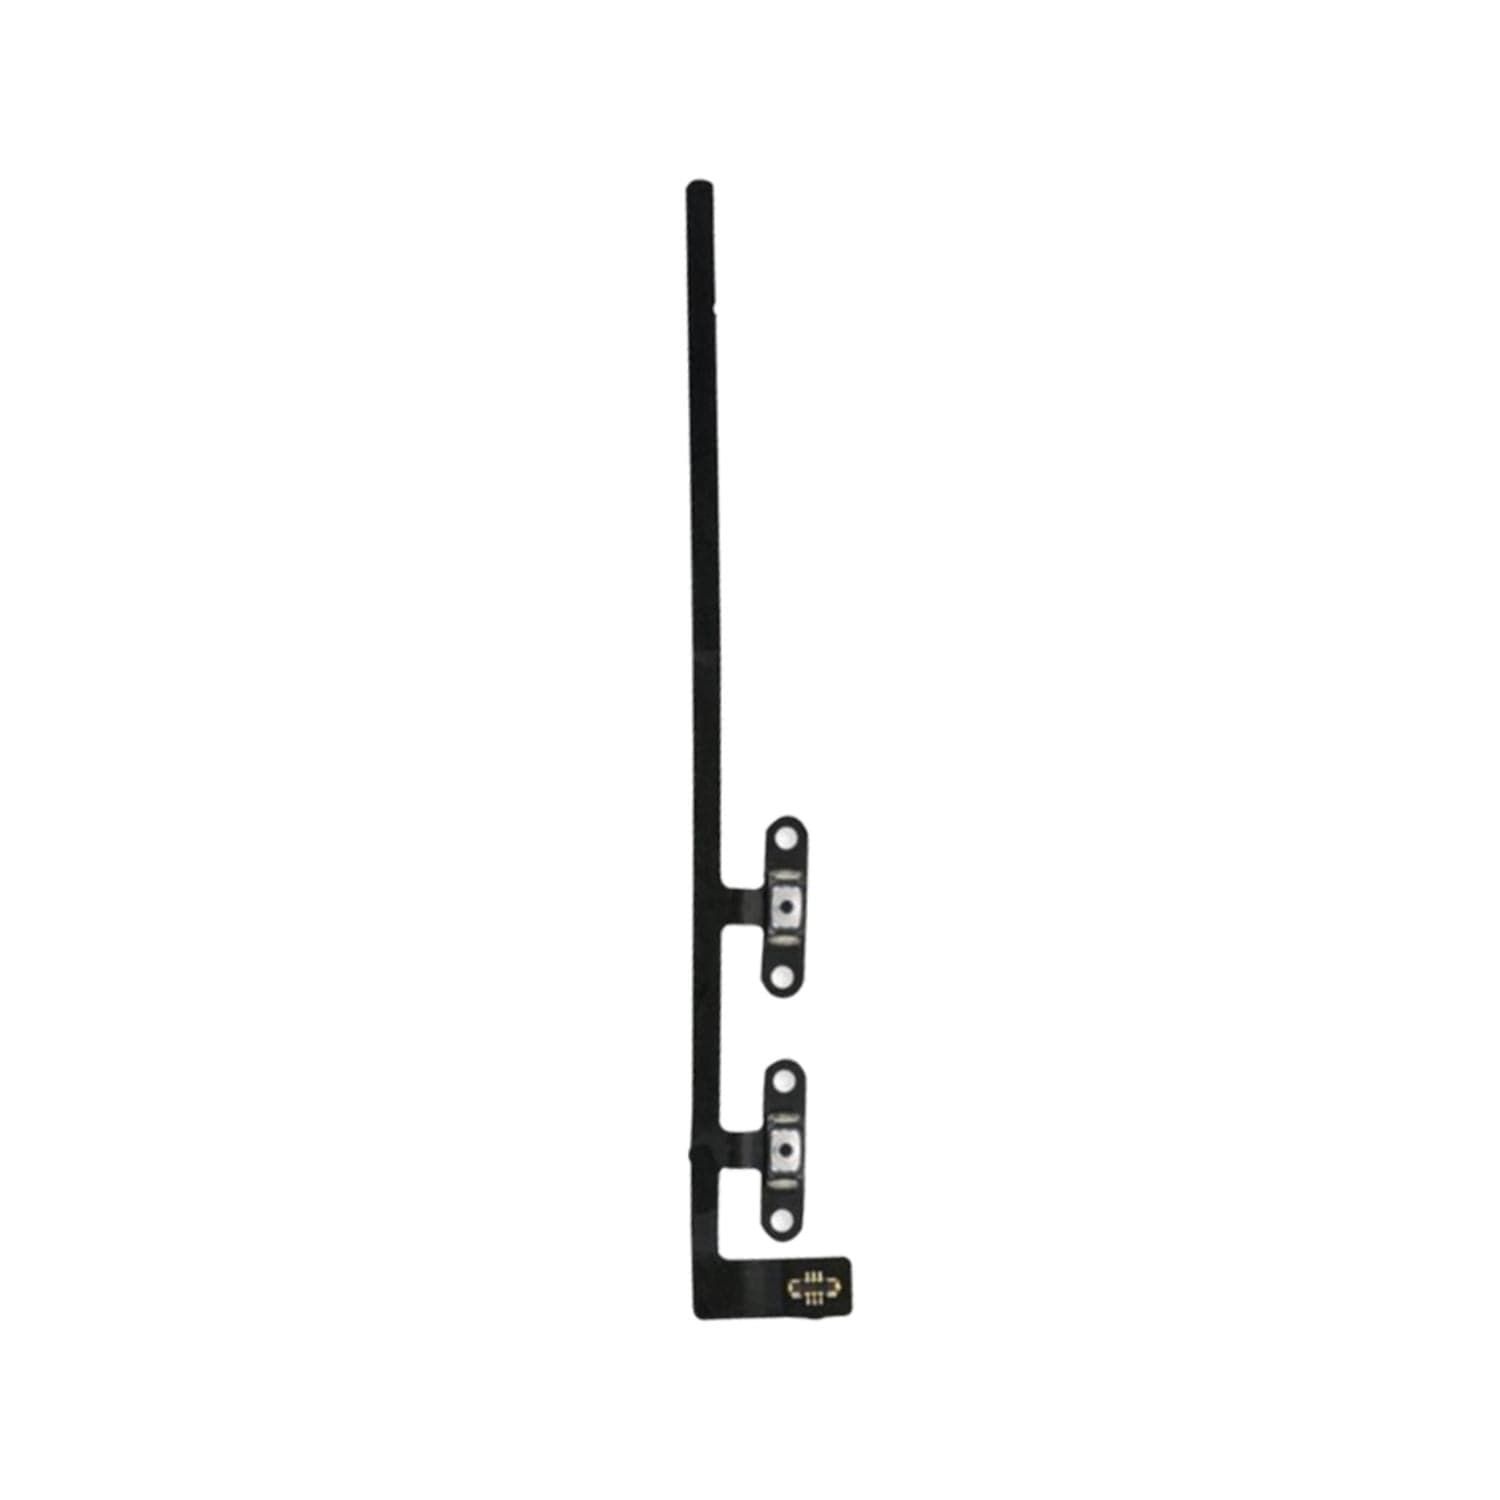 Volume Button Flex Cable for iPad Air 3